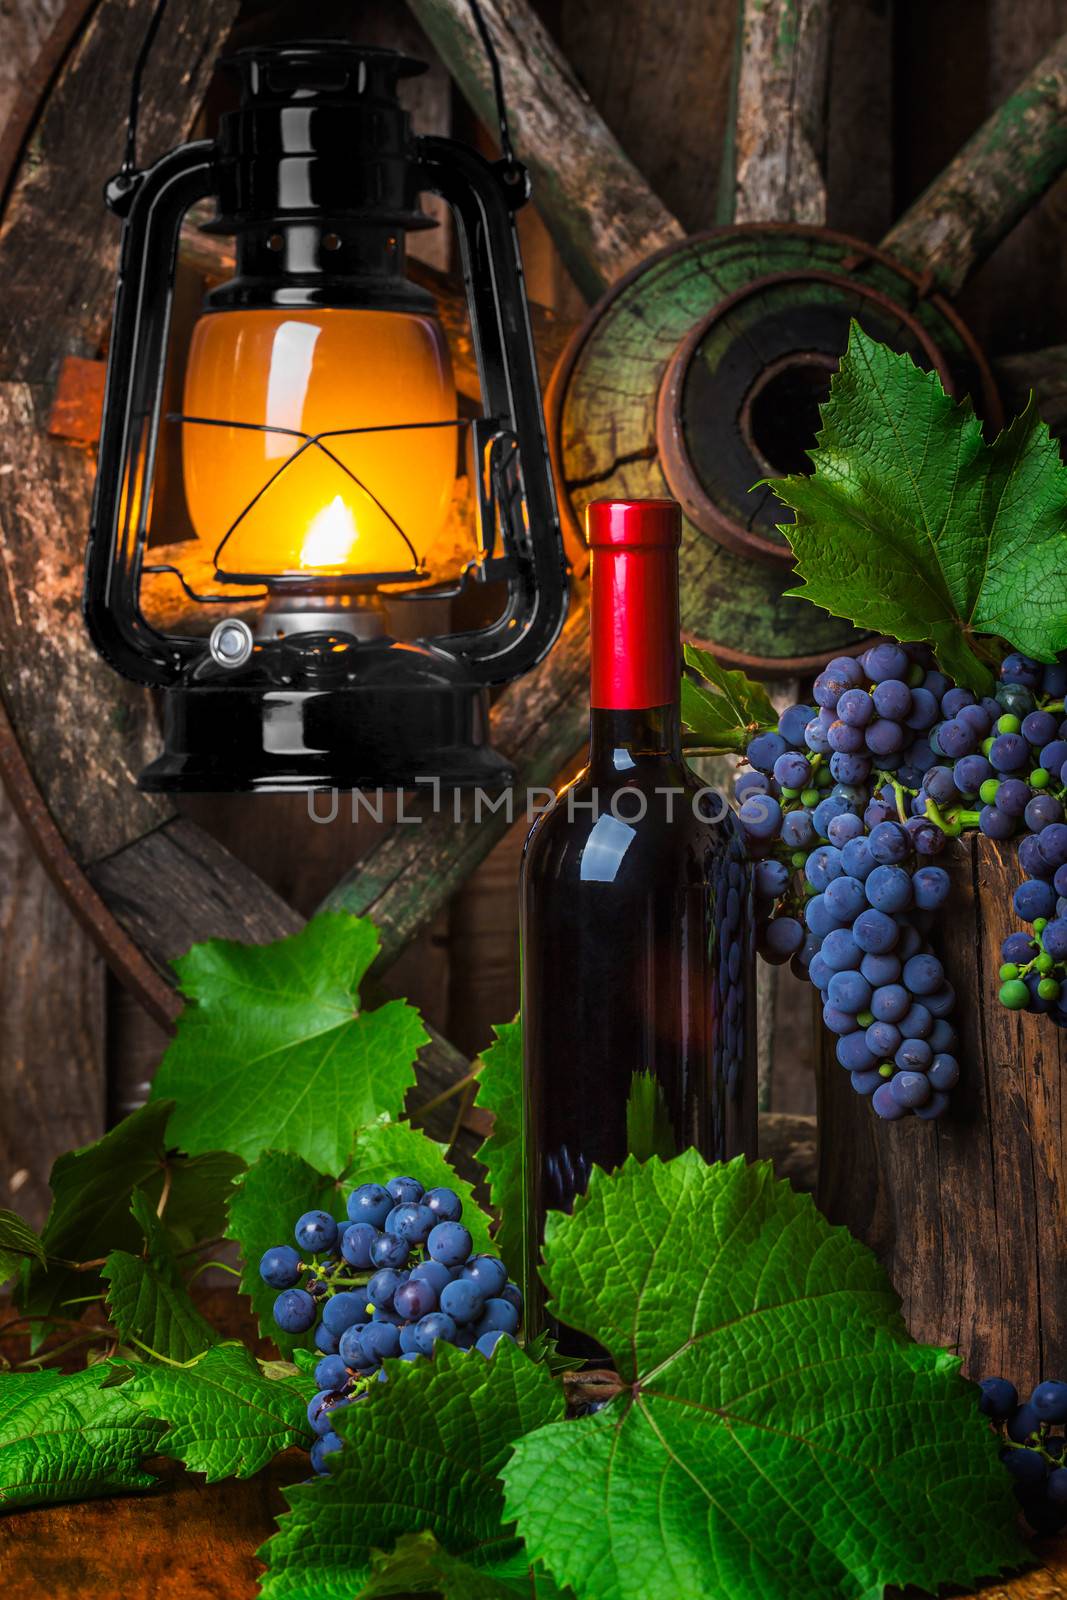 Bottle of red wine with grapes on a background of a kerosene lamp